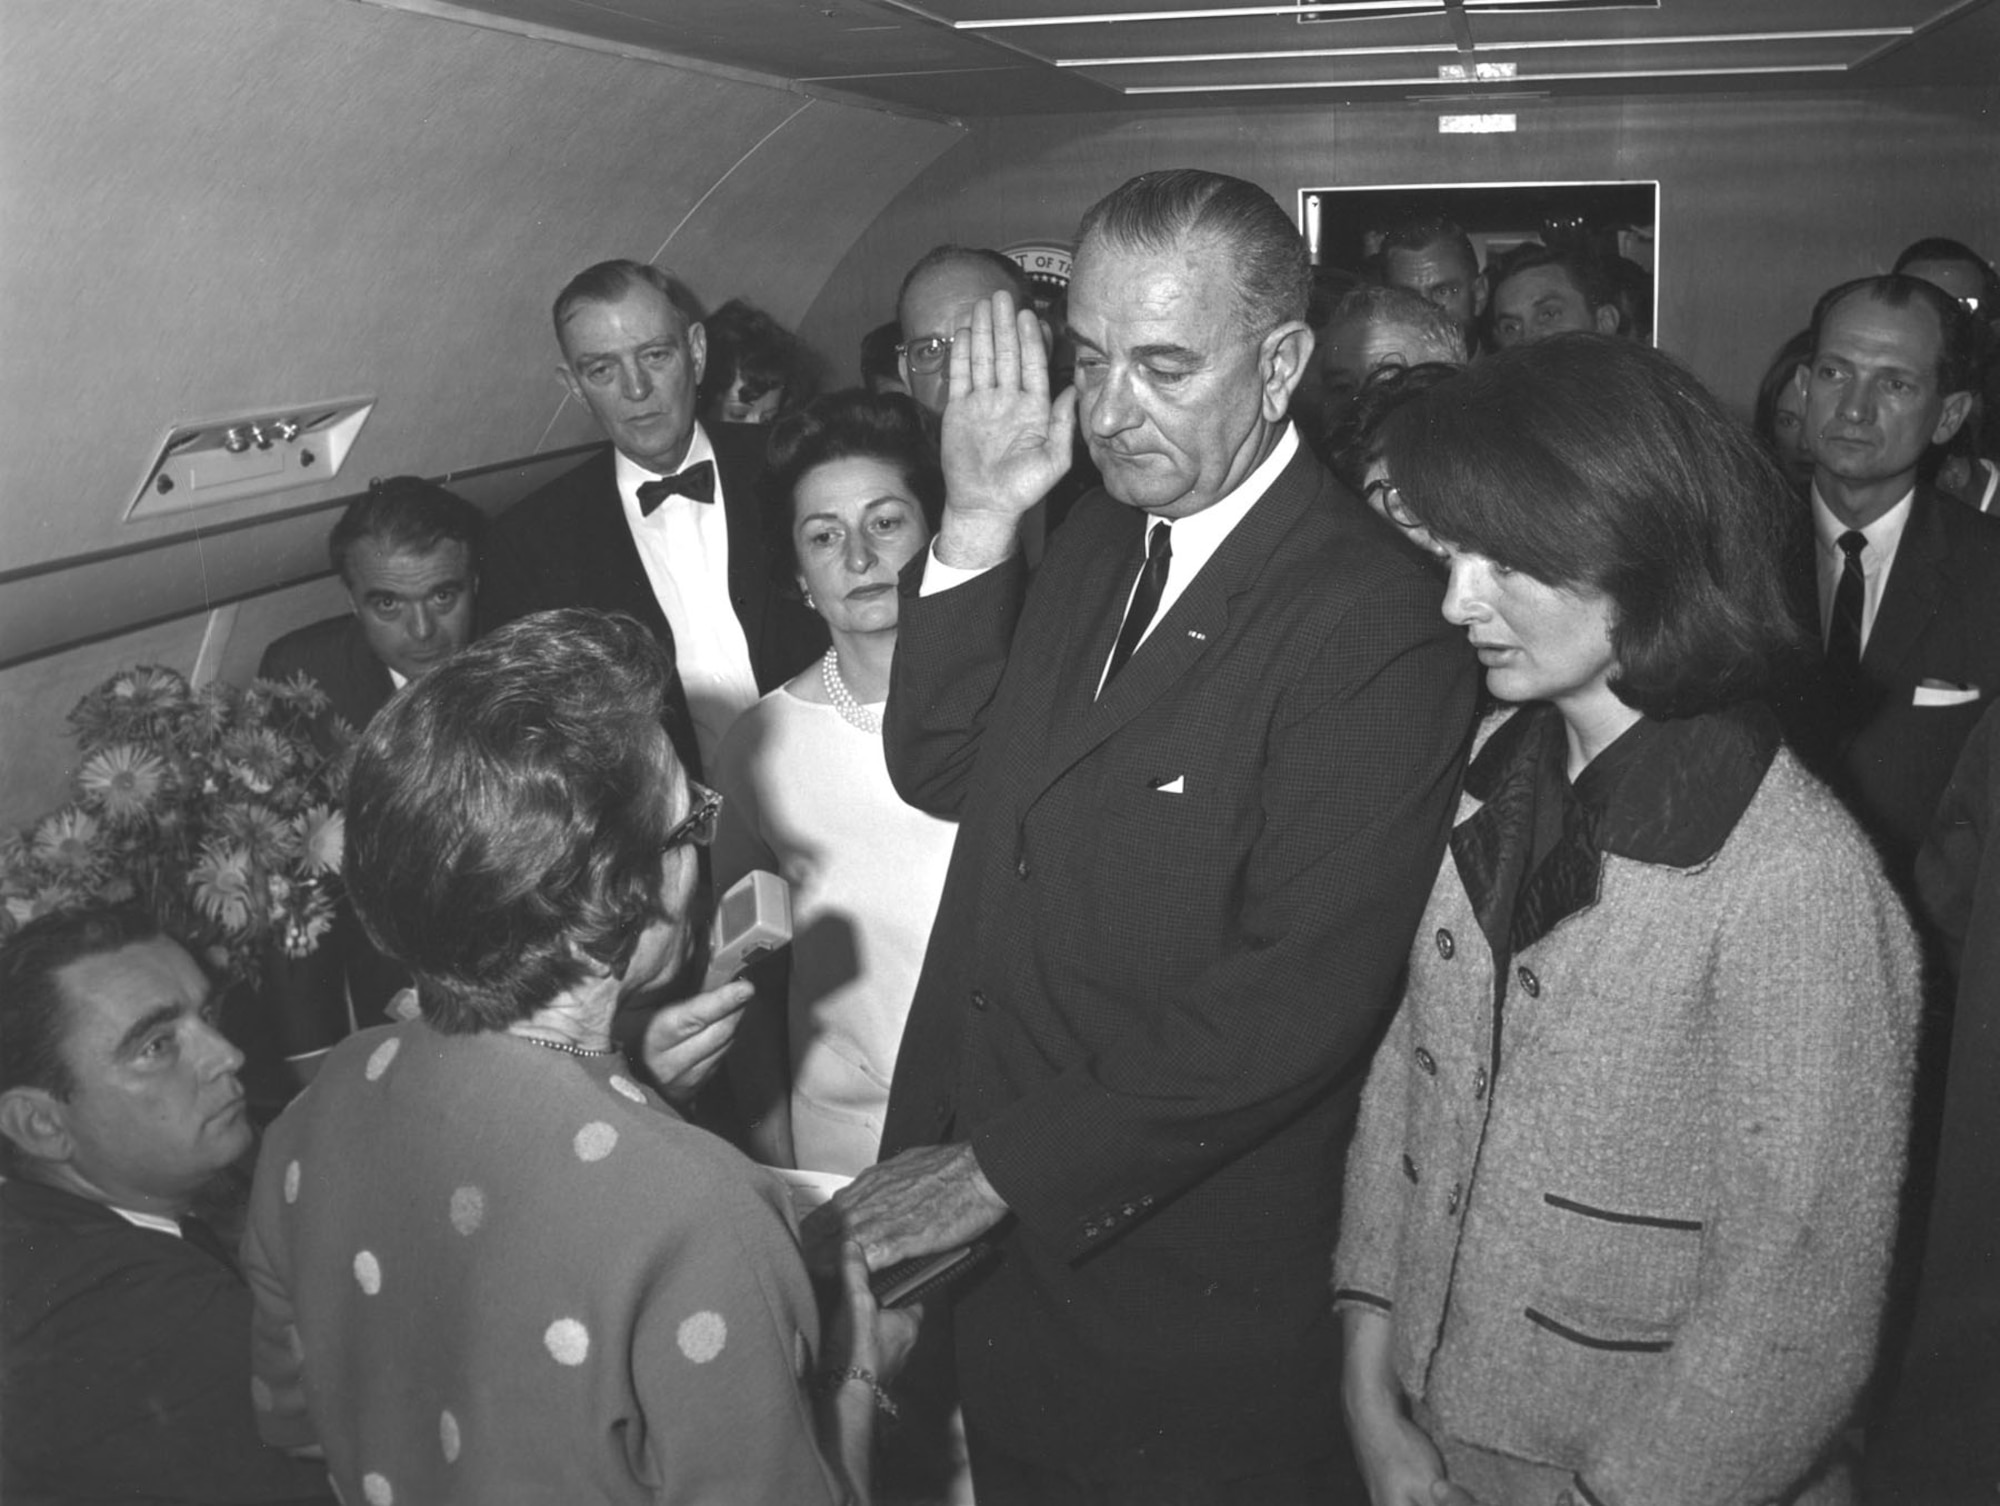 Lyndon B. Johnson takes the oath of office on board Air Force One (SAM 26000). Johnson became the 36th president of the United States following John F. Kennedy's assassination. (U.S. Air Force photo)